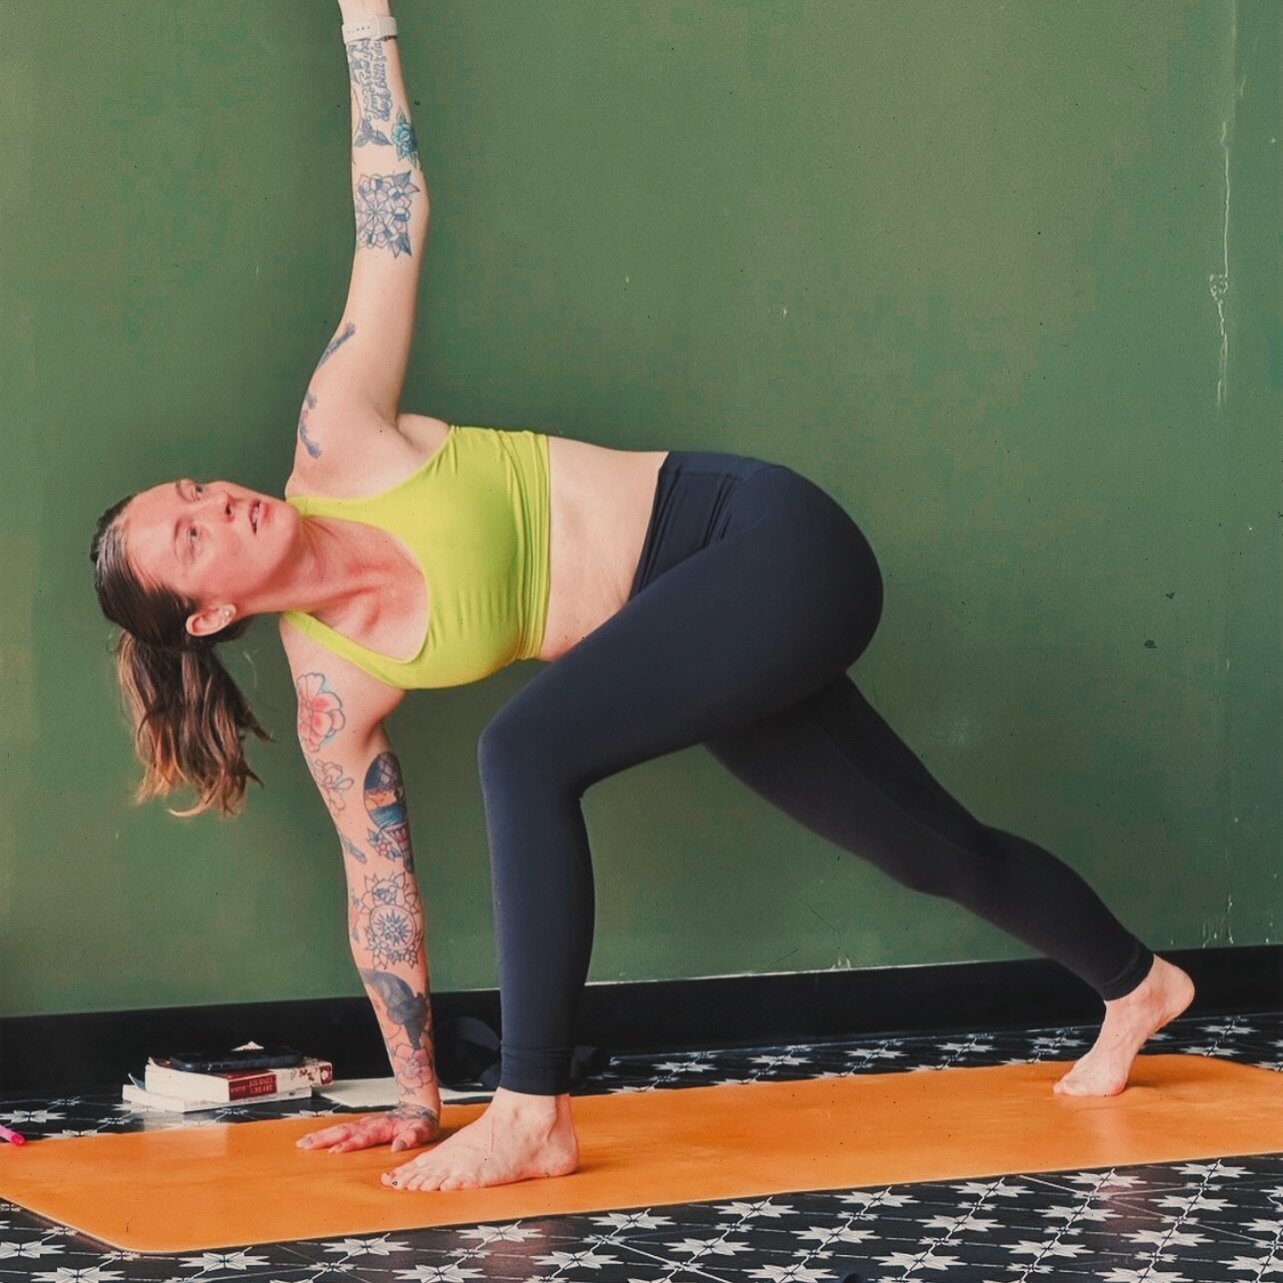 What could be better than one yoga class with @raisehell_yoga this Sunday? Oh we know! TWO yoga classes! That&rsquo;s right! Becca will be teaching two classes back to back this Sunday, April 7th. The first one will be a New Wave &amp; Metal yoga flo